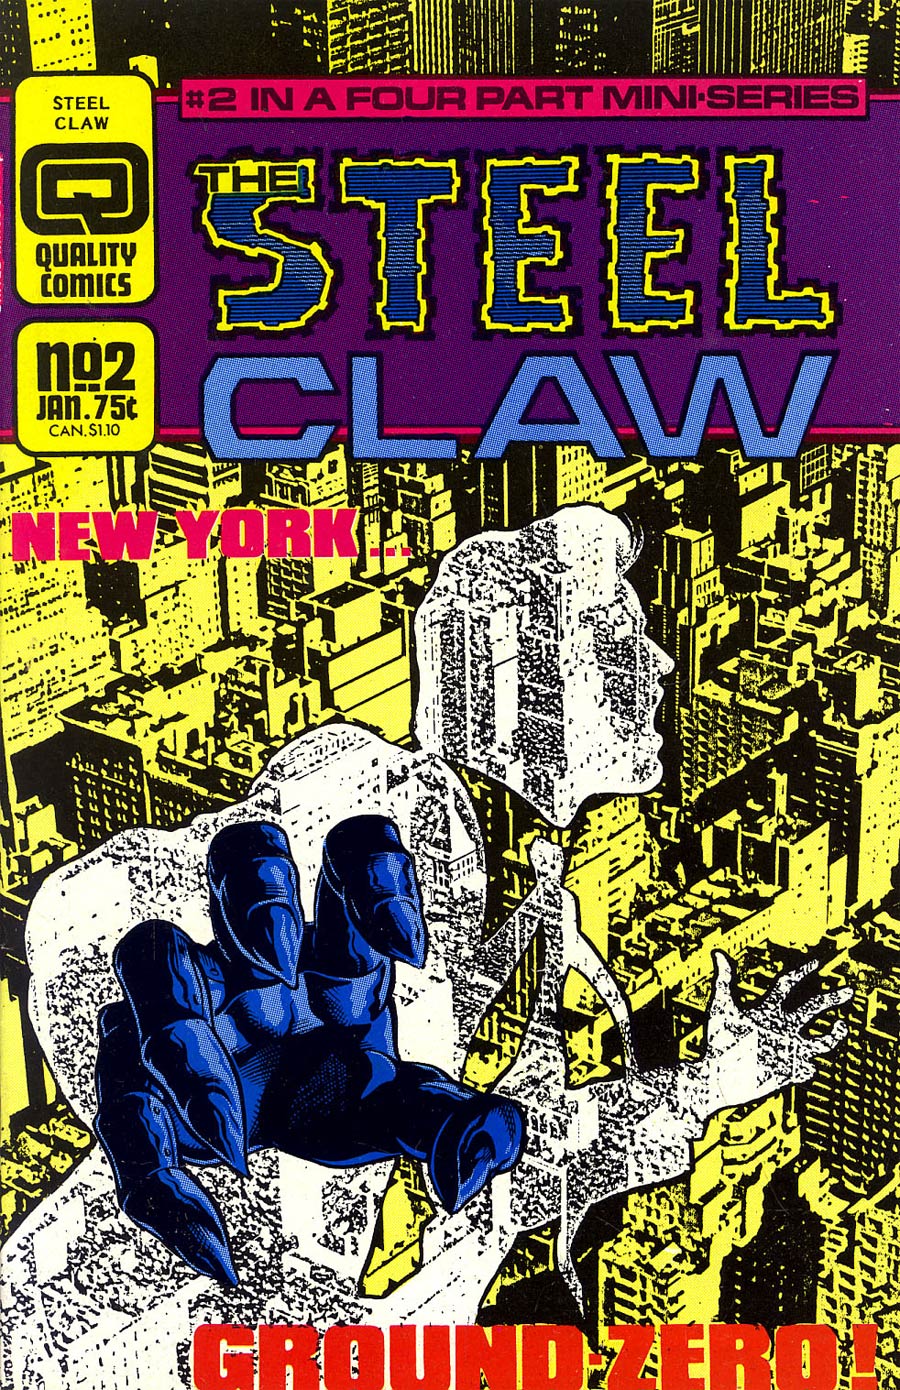 Steel Claw #2